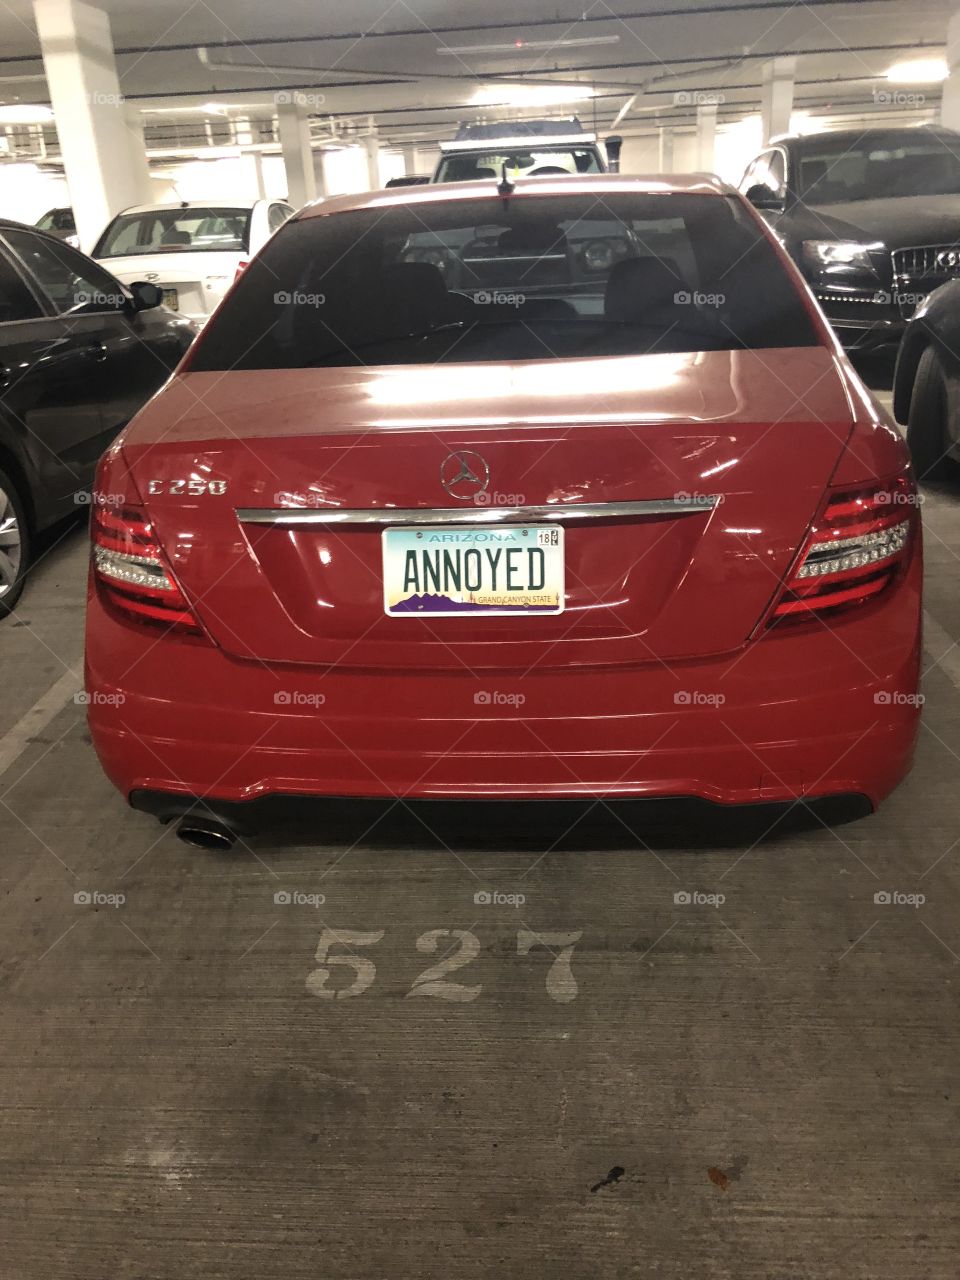 Funny license plate on a car in a parking garage